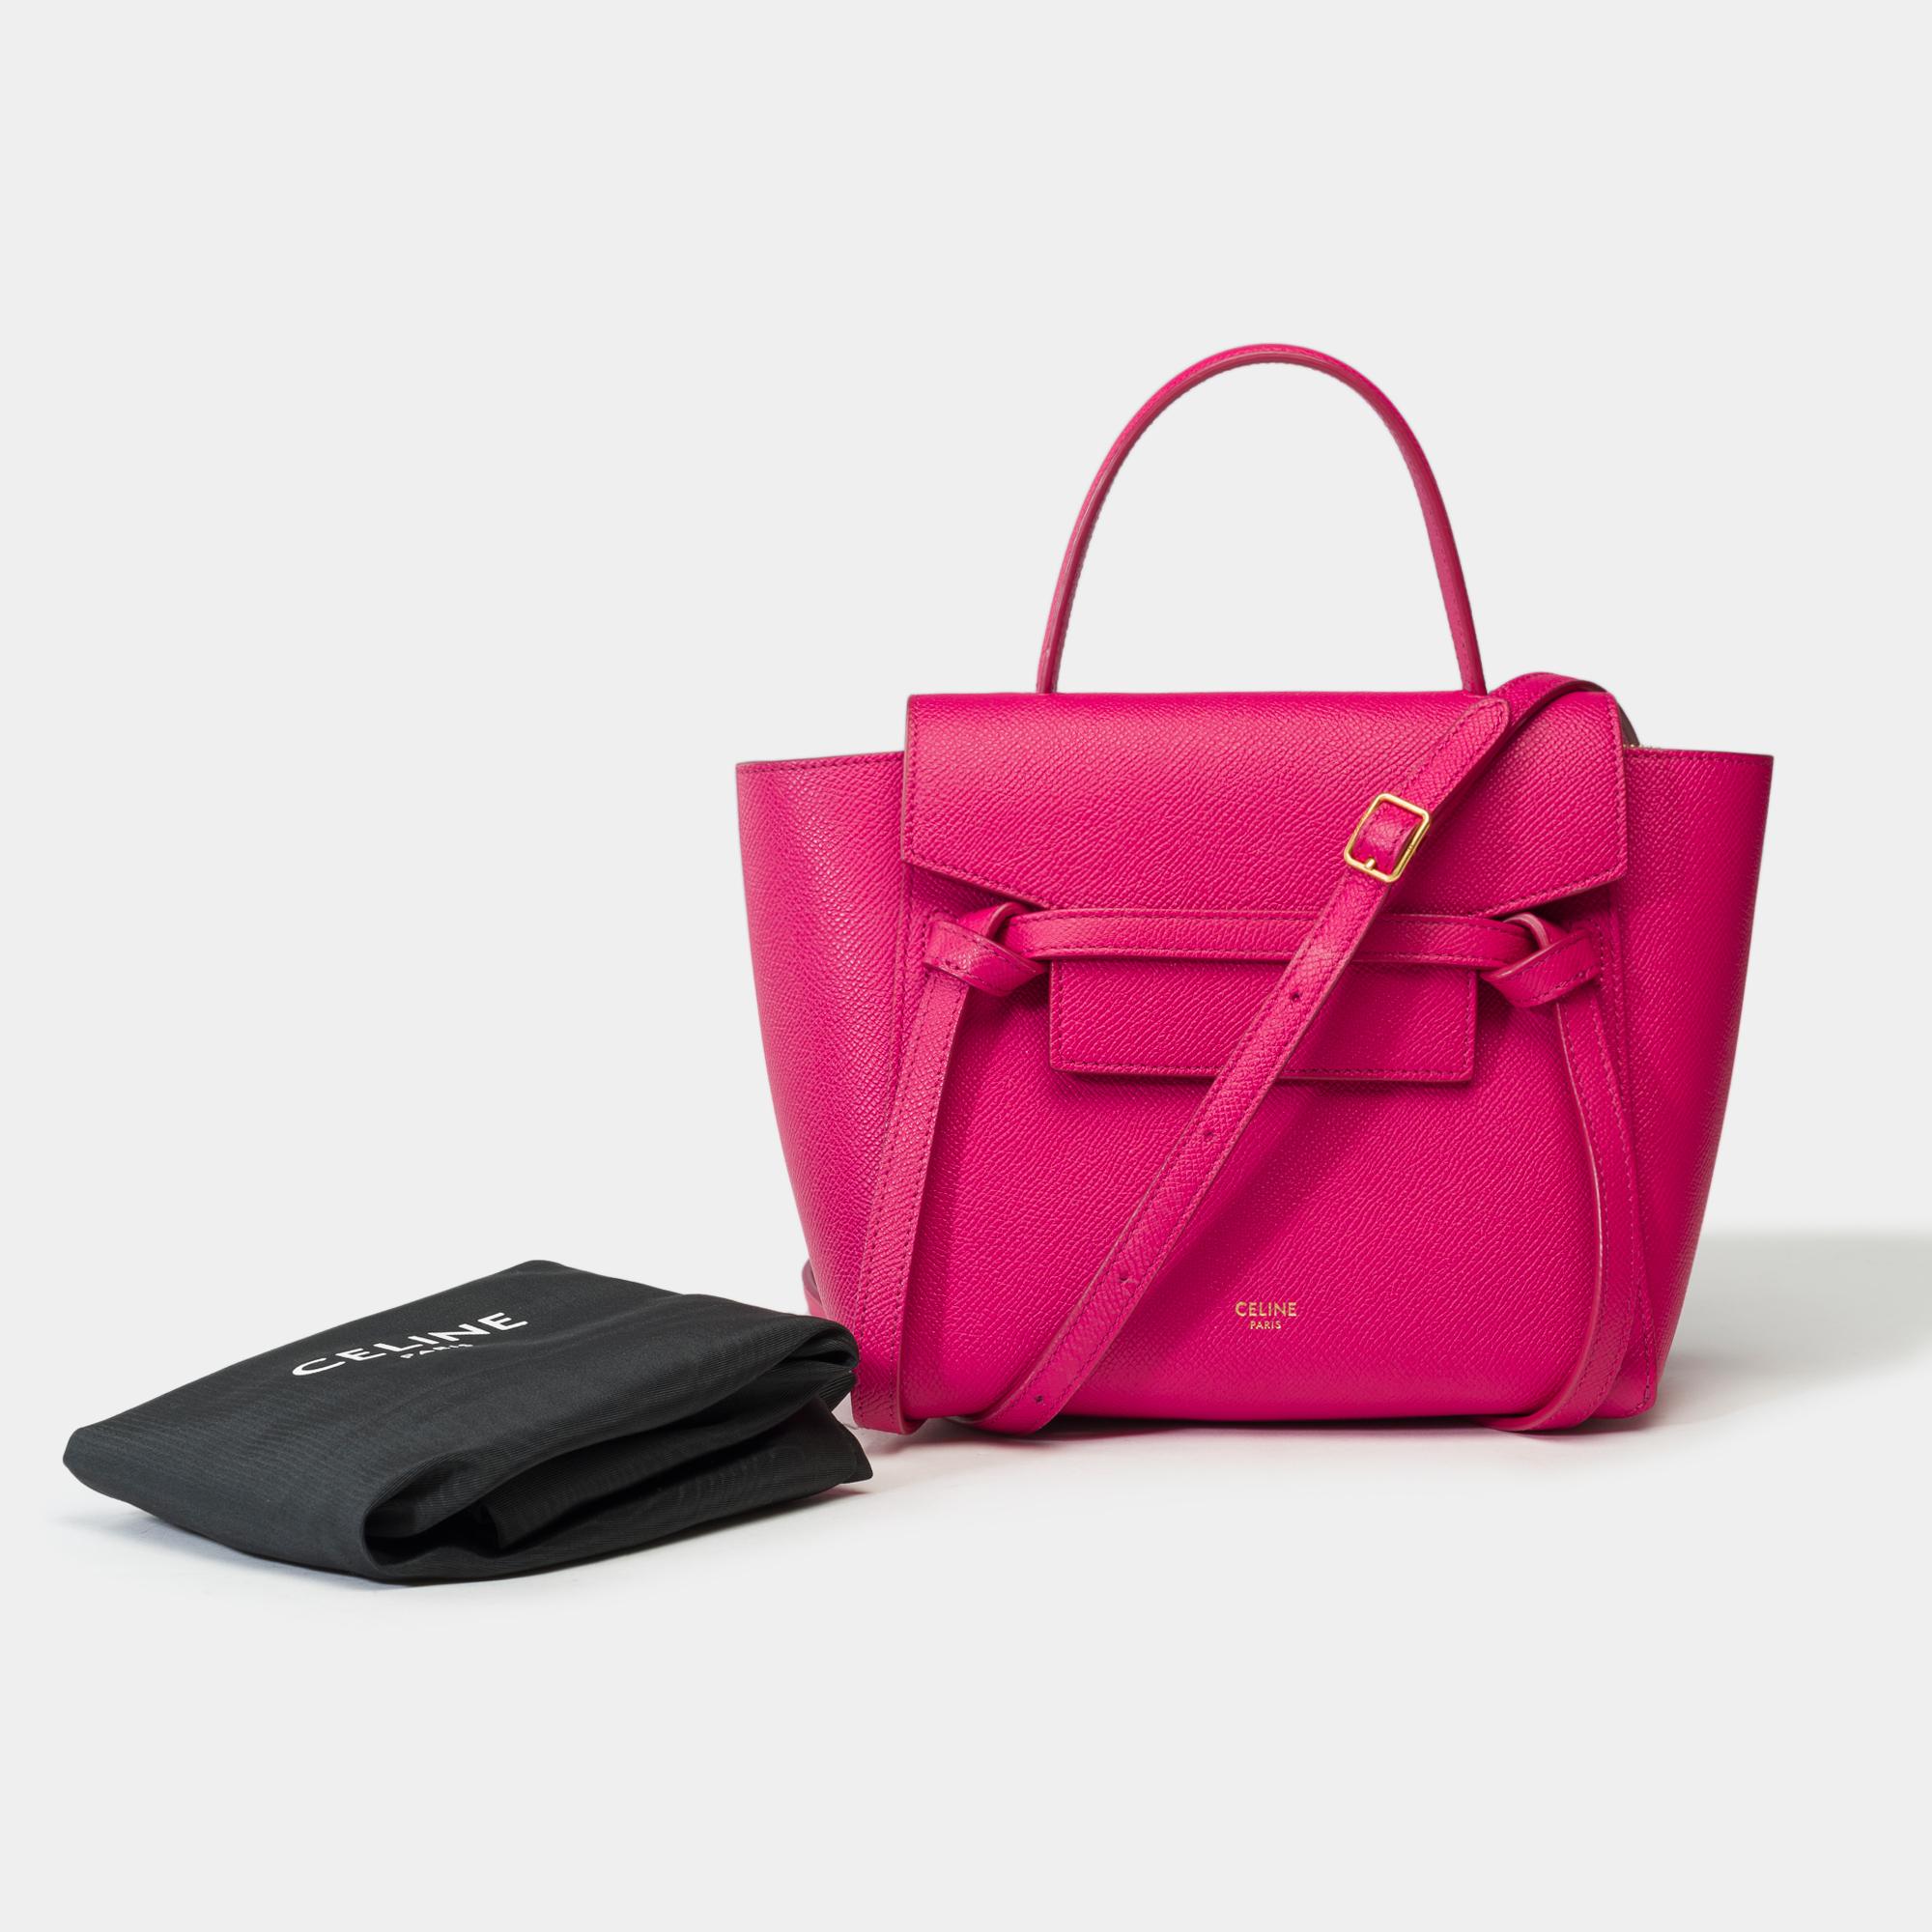 Stunning​ ​Celine​ ​Belt​ ​Nano​ ​handbag​ ​strap​ ​in​ ​pink​ ​grained​ ​calf​ ​leather,​ ​handle​ ​and​ ​removable​ ​shoulder​ ​strap​ ​adjustable​ ​in​ ​pink​ ​leather​ ​and​ ​allowing​ ​a​ ​hand​ ​or​ ​shoulder​ ​carry


Closure​ ​by​ ​flap,​